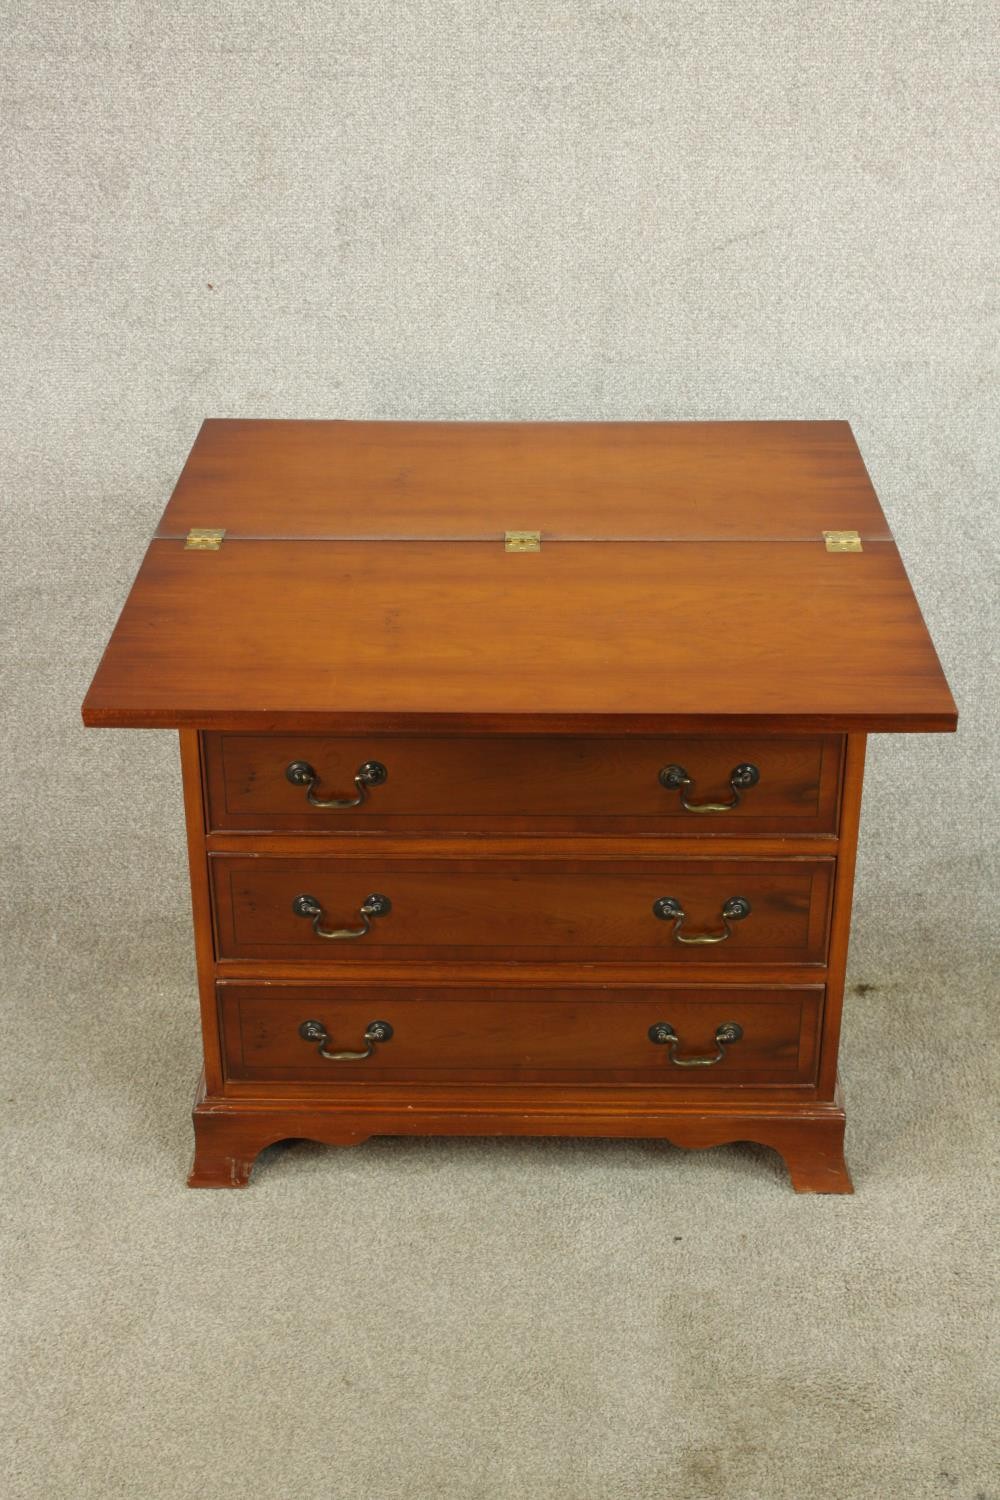 A contemporary Yew wood bachelors style chest of four graduating drawers with rotating foldover - Image 3 of 8